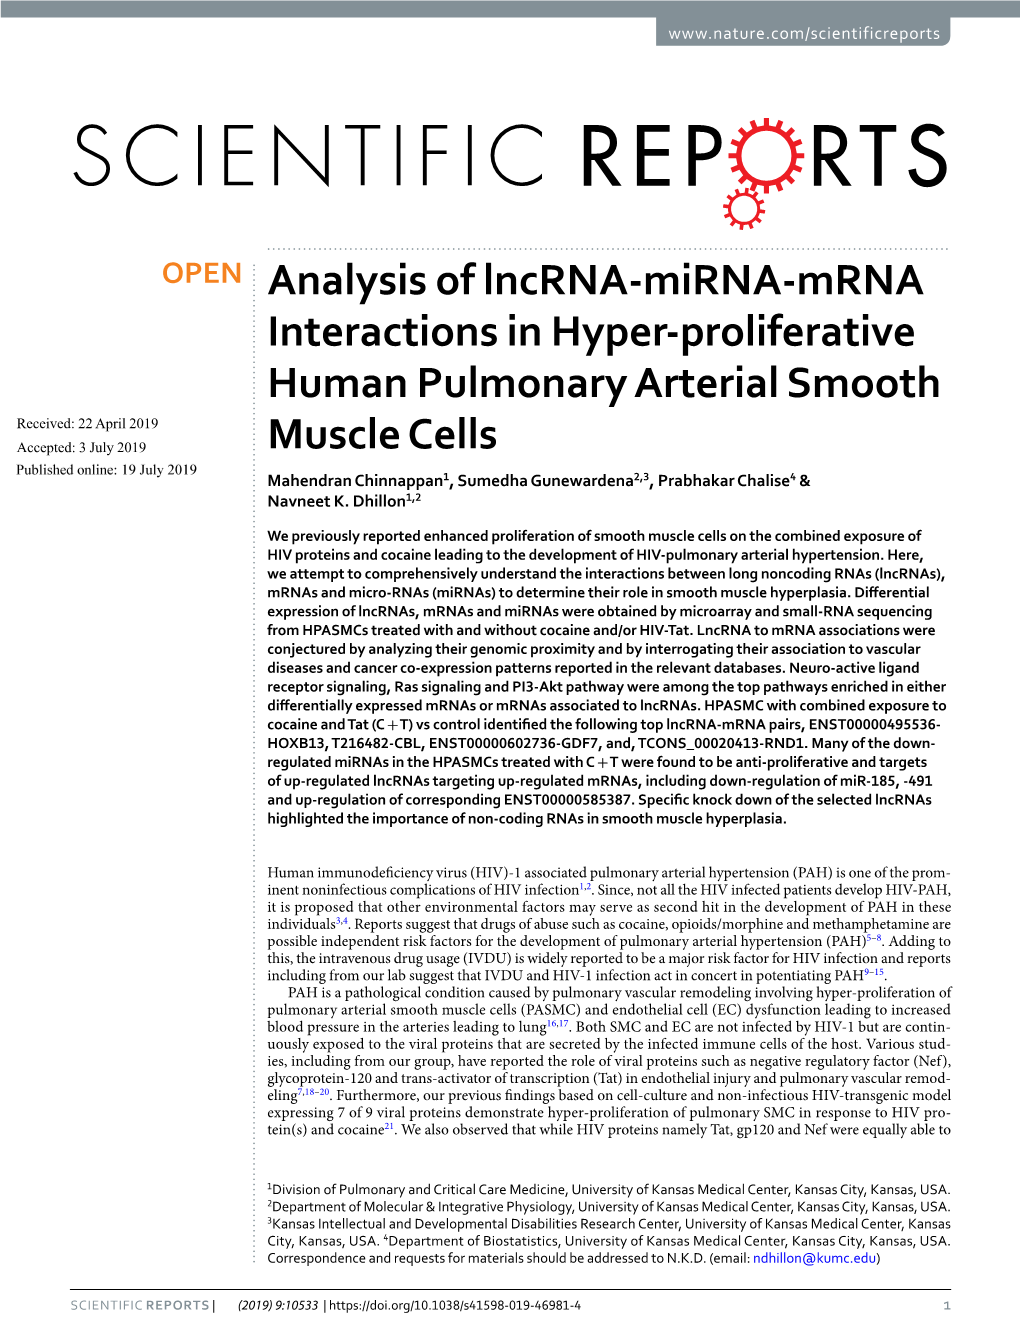 Analysis of Lncrna-Mirna-Mrna Interactions in Hyper-Proliferative Human Pulmonary Arterial Smooth Muscle Cells